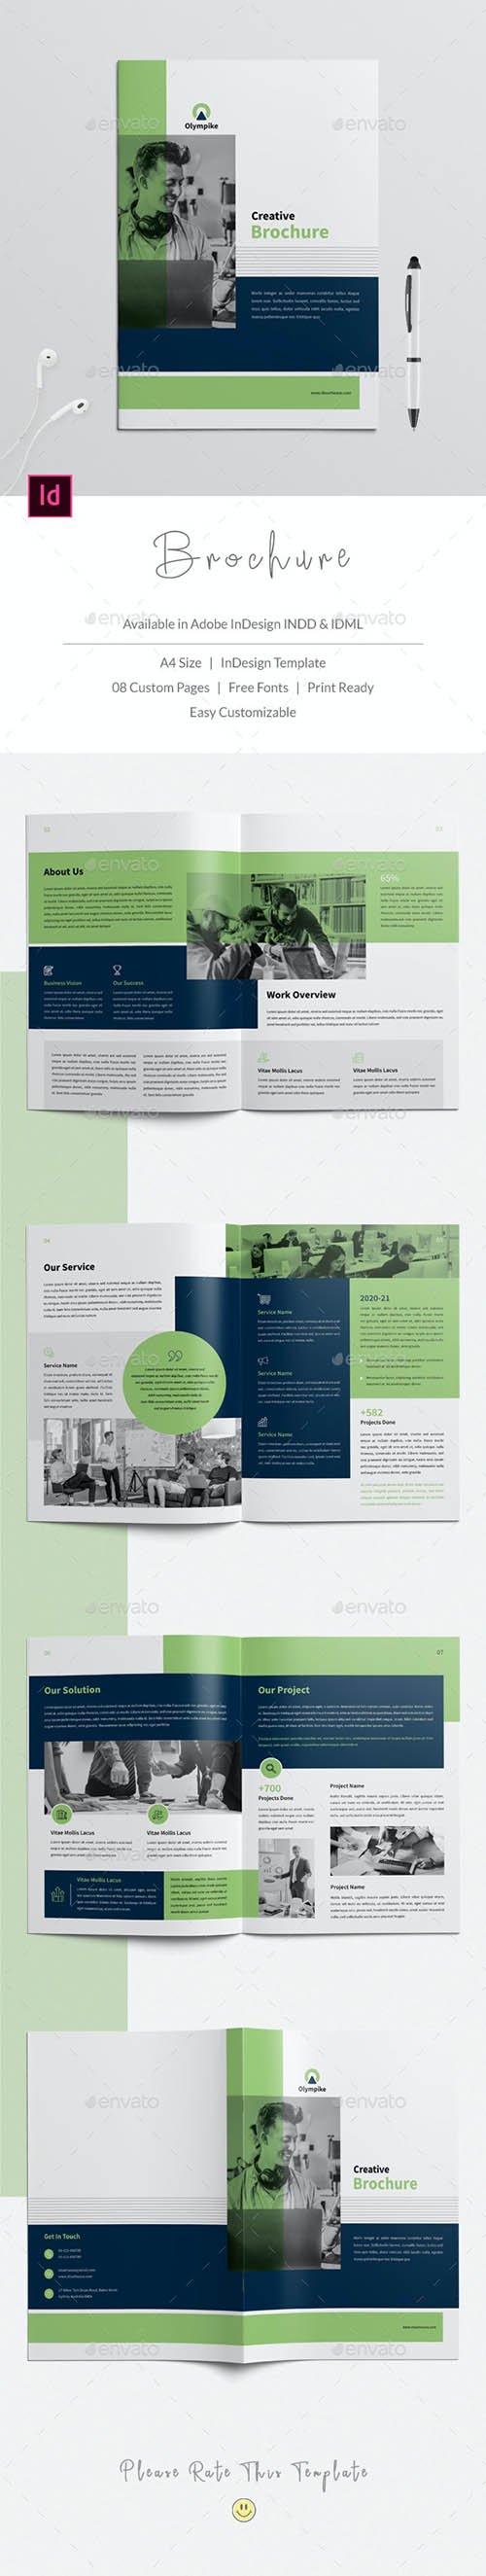 GraphicRiver - 8 Pages Brochure - 27537944